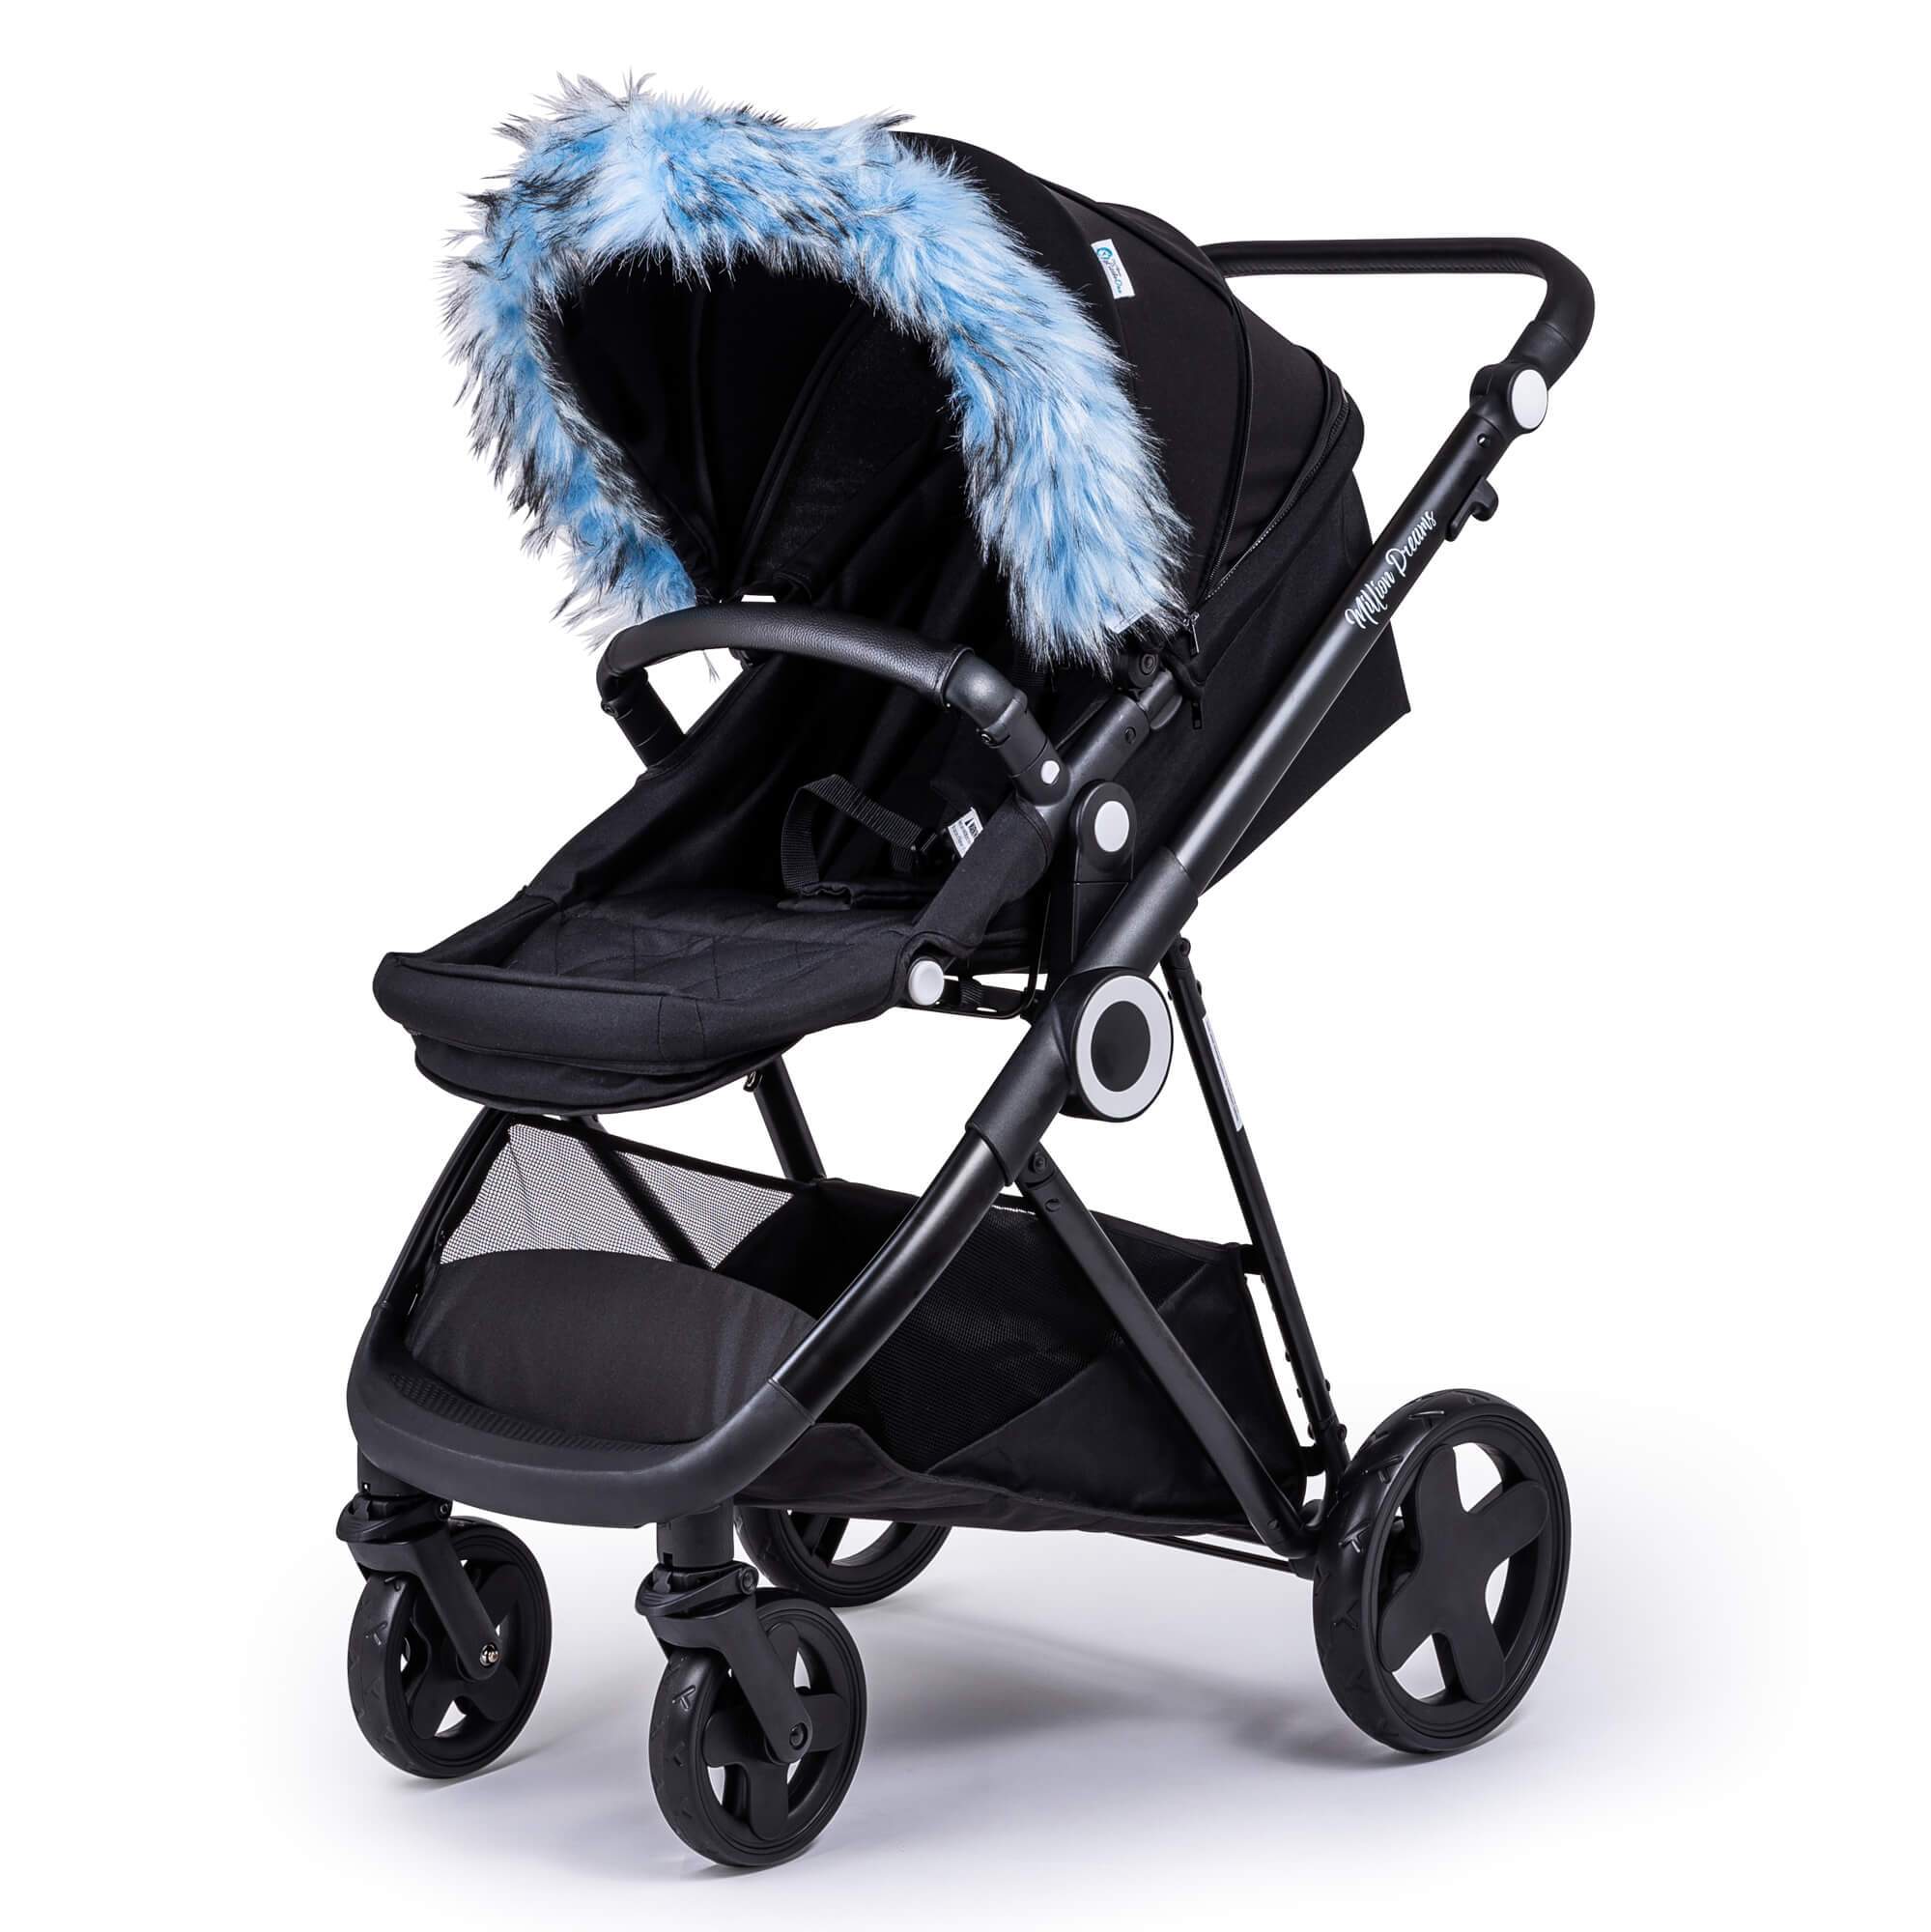 Pram Fur Hood Trim Attachment for Pushchair Compatible with Silver Cross - Light Blue / Fits All Models | For Your Little One